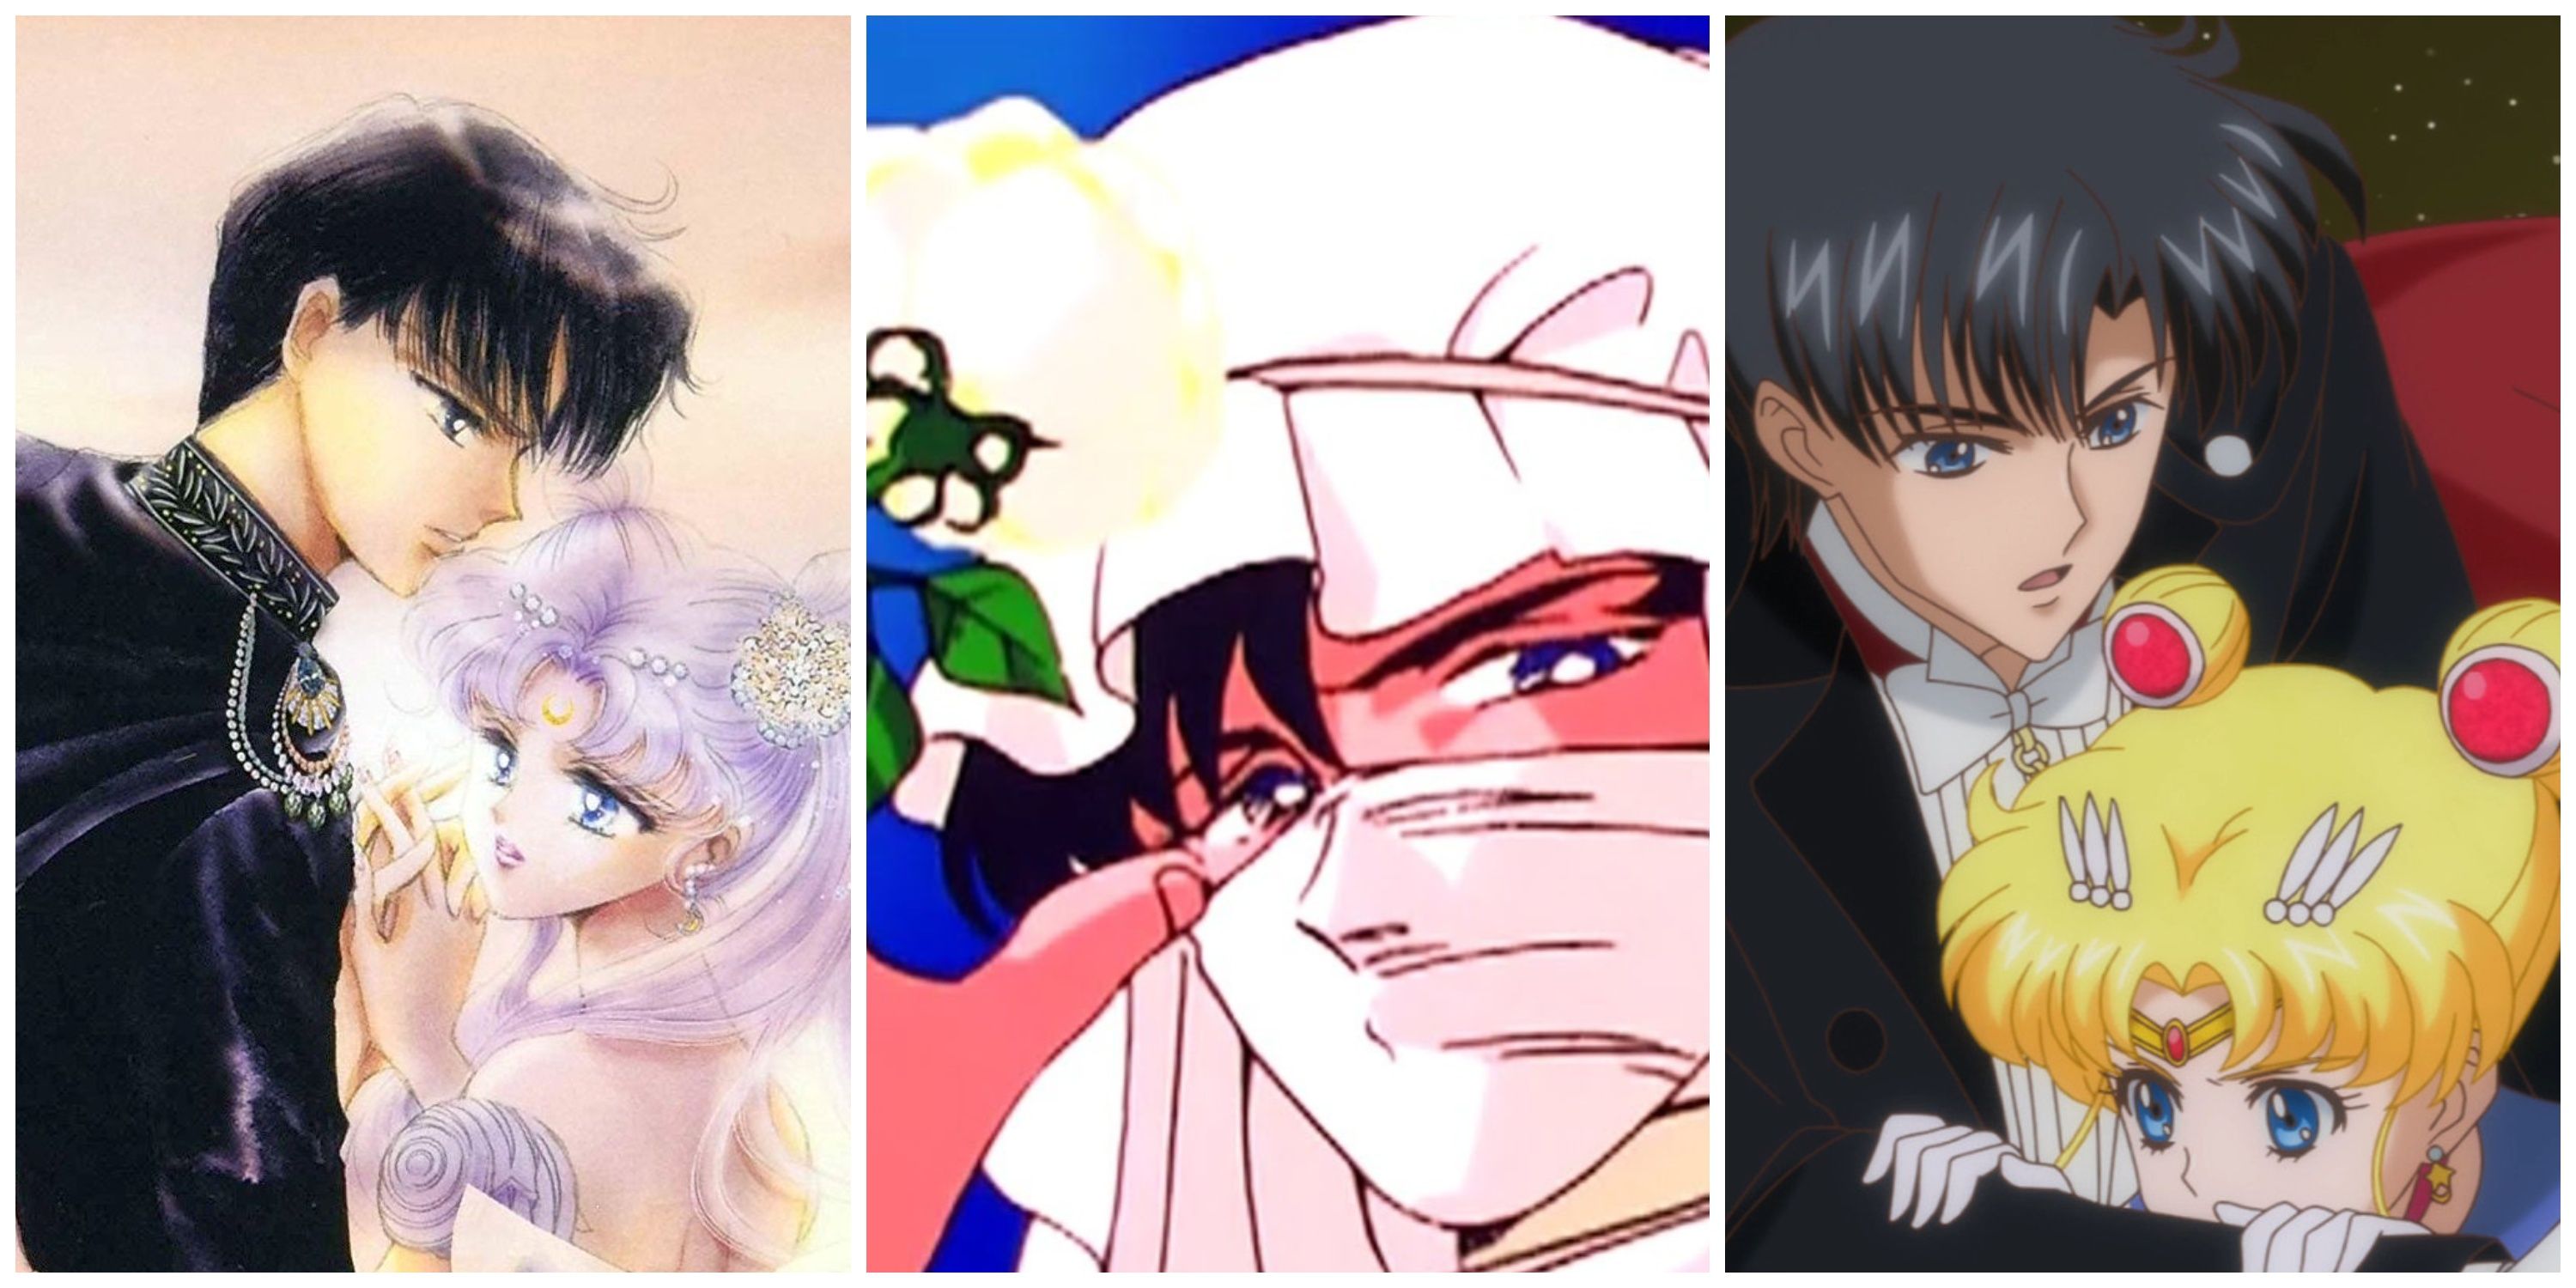  Split image, Prince Endymion dancing with Princess Serenity in the manga, Moonlight Knight posing with a white rose, and Tuxedo Mask holding Sailor Moon in Sailor Moon Crystal